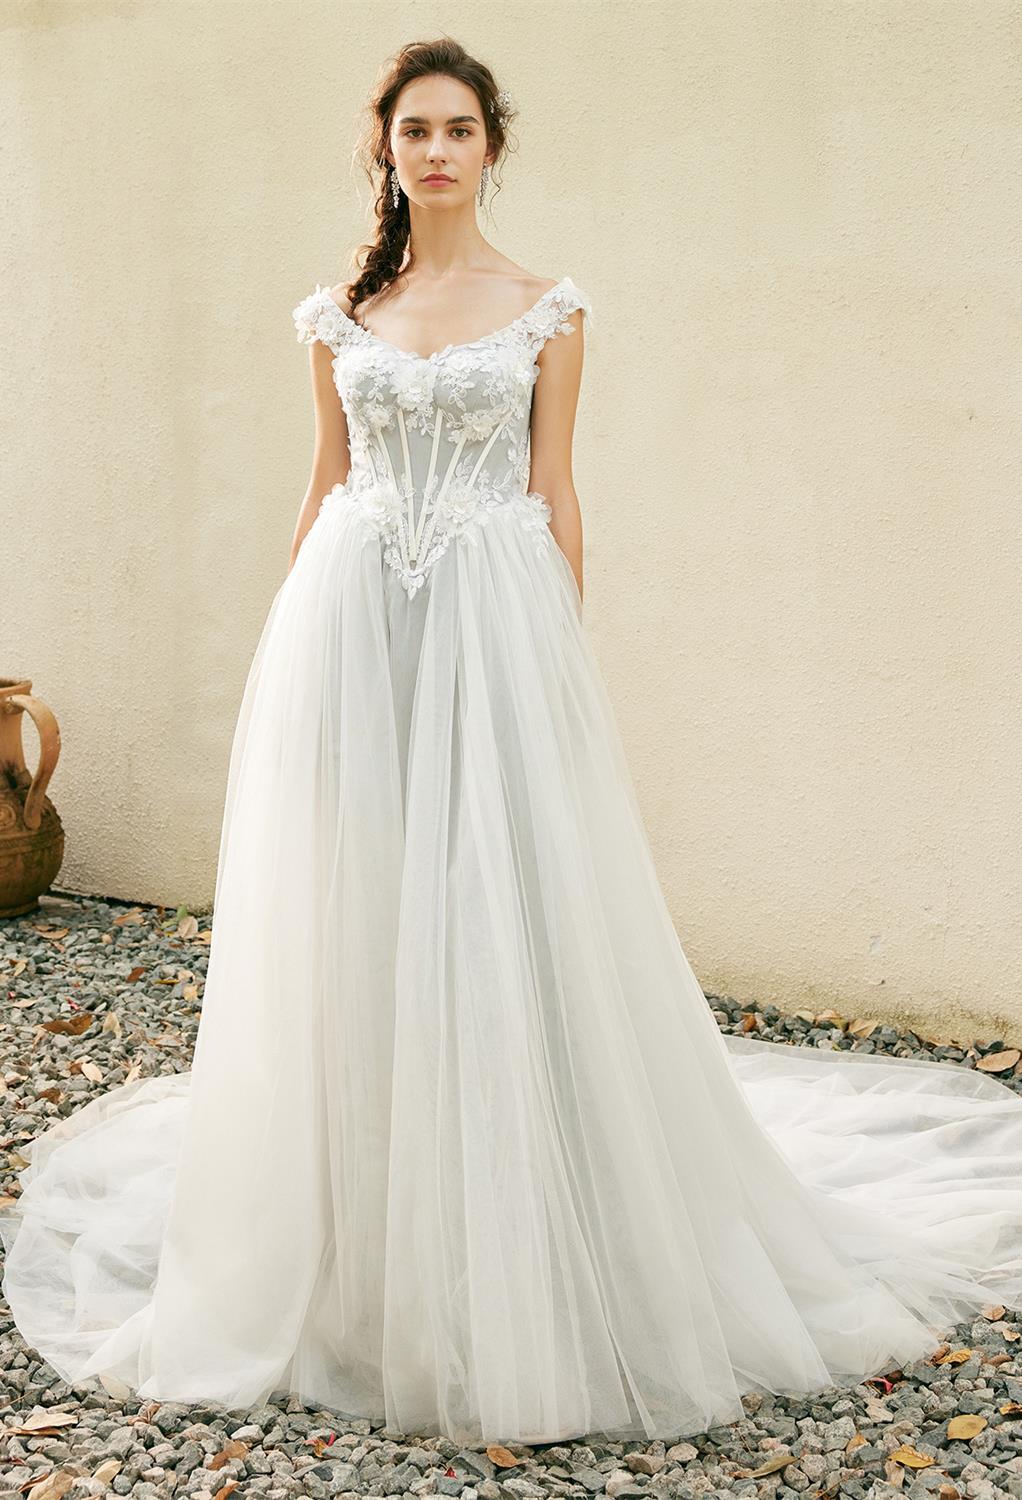 The Ultimate Guide to Choosing Your Perfect Bridal Wedding Dress